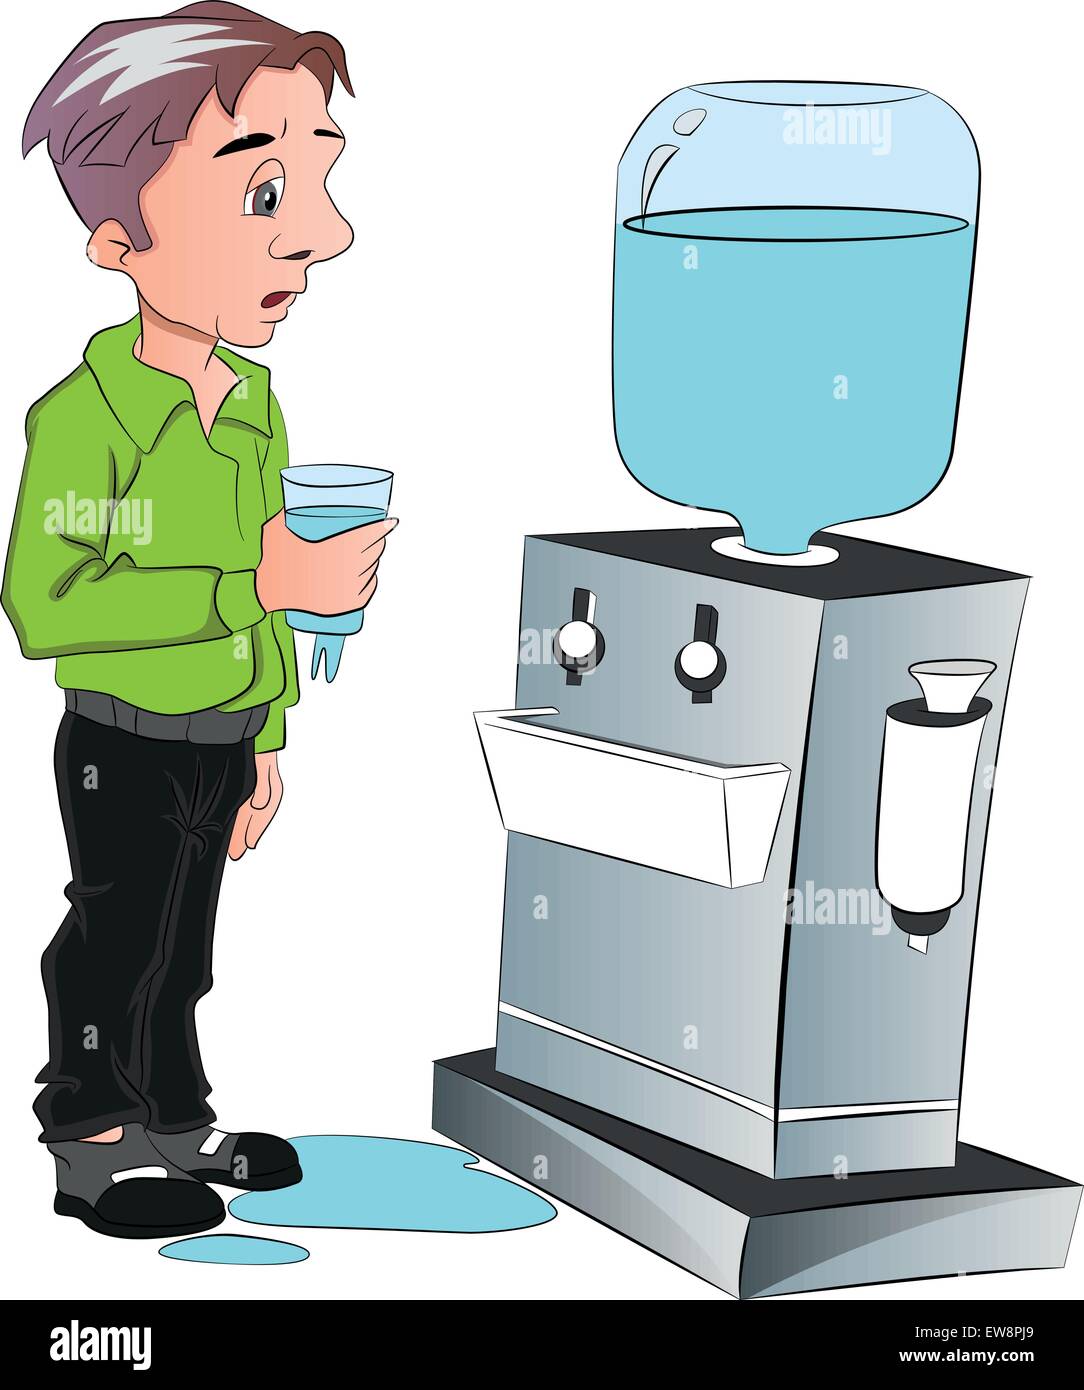 444 Painted Water Dispenser Images, Stock Photos, 3D objects, & Vectors